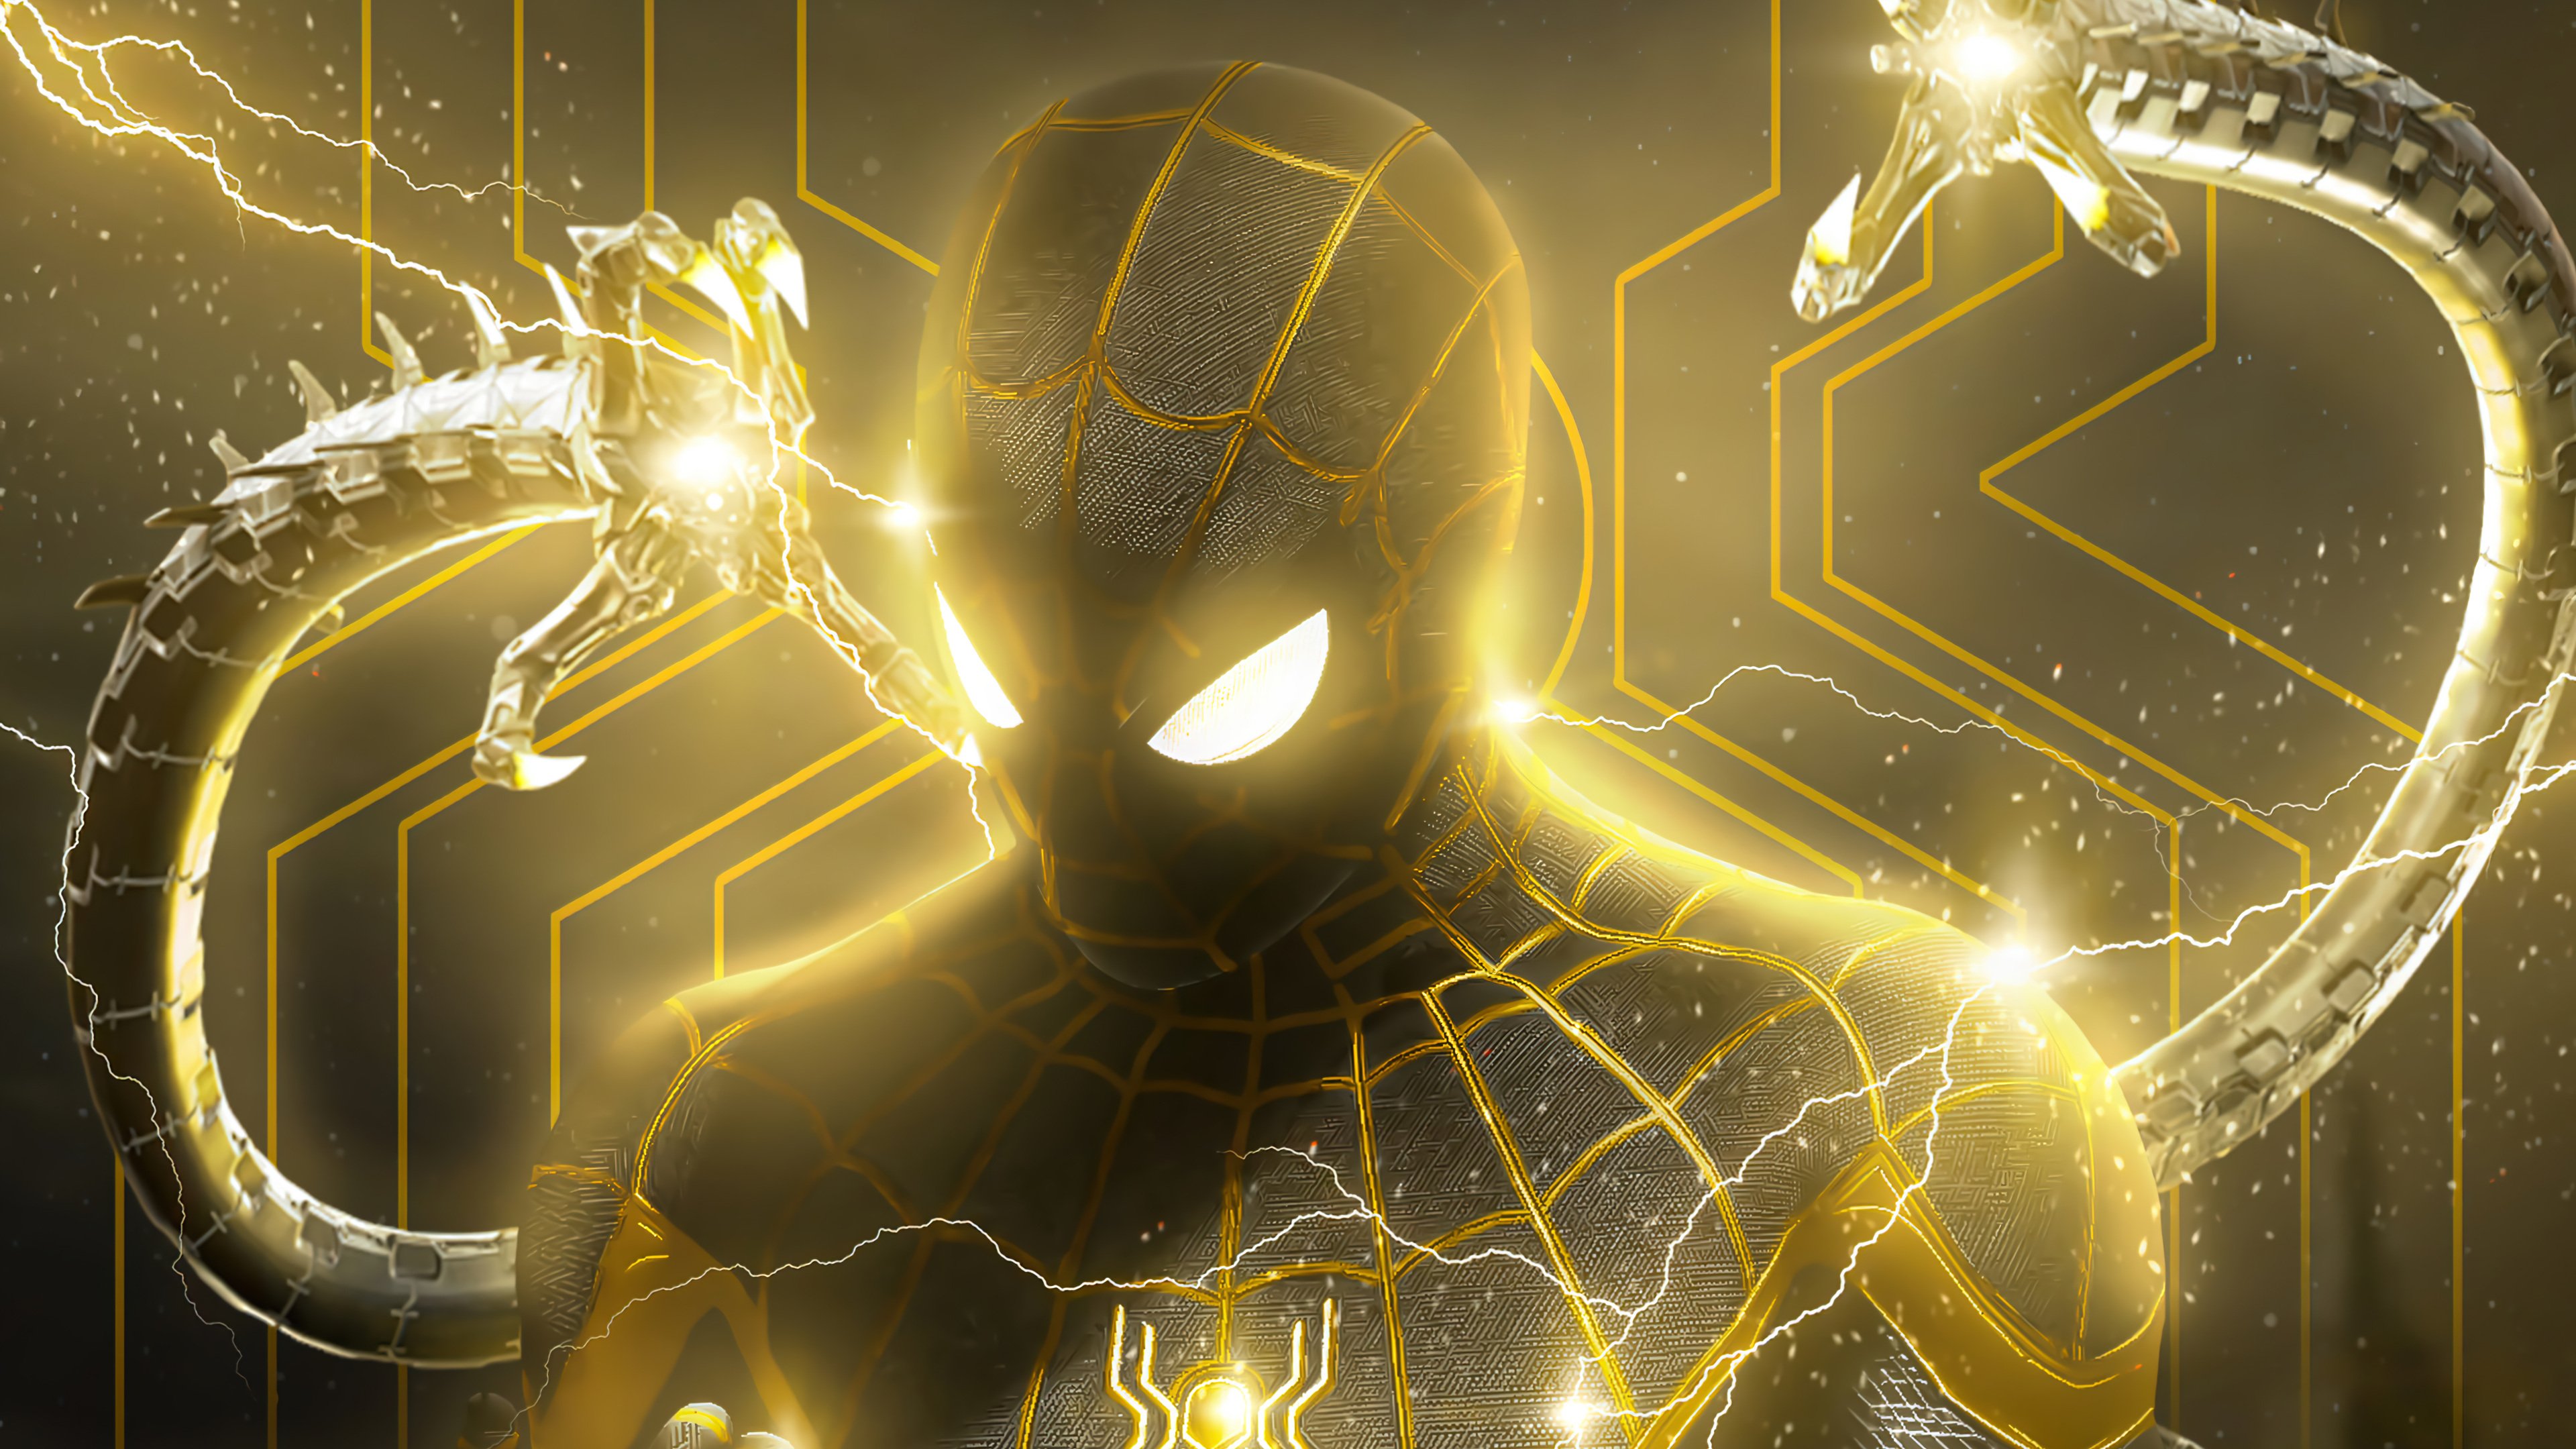 Wallpaper Black and gold suit in Spider Man No way home